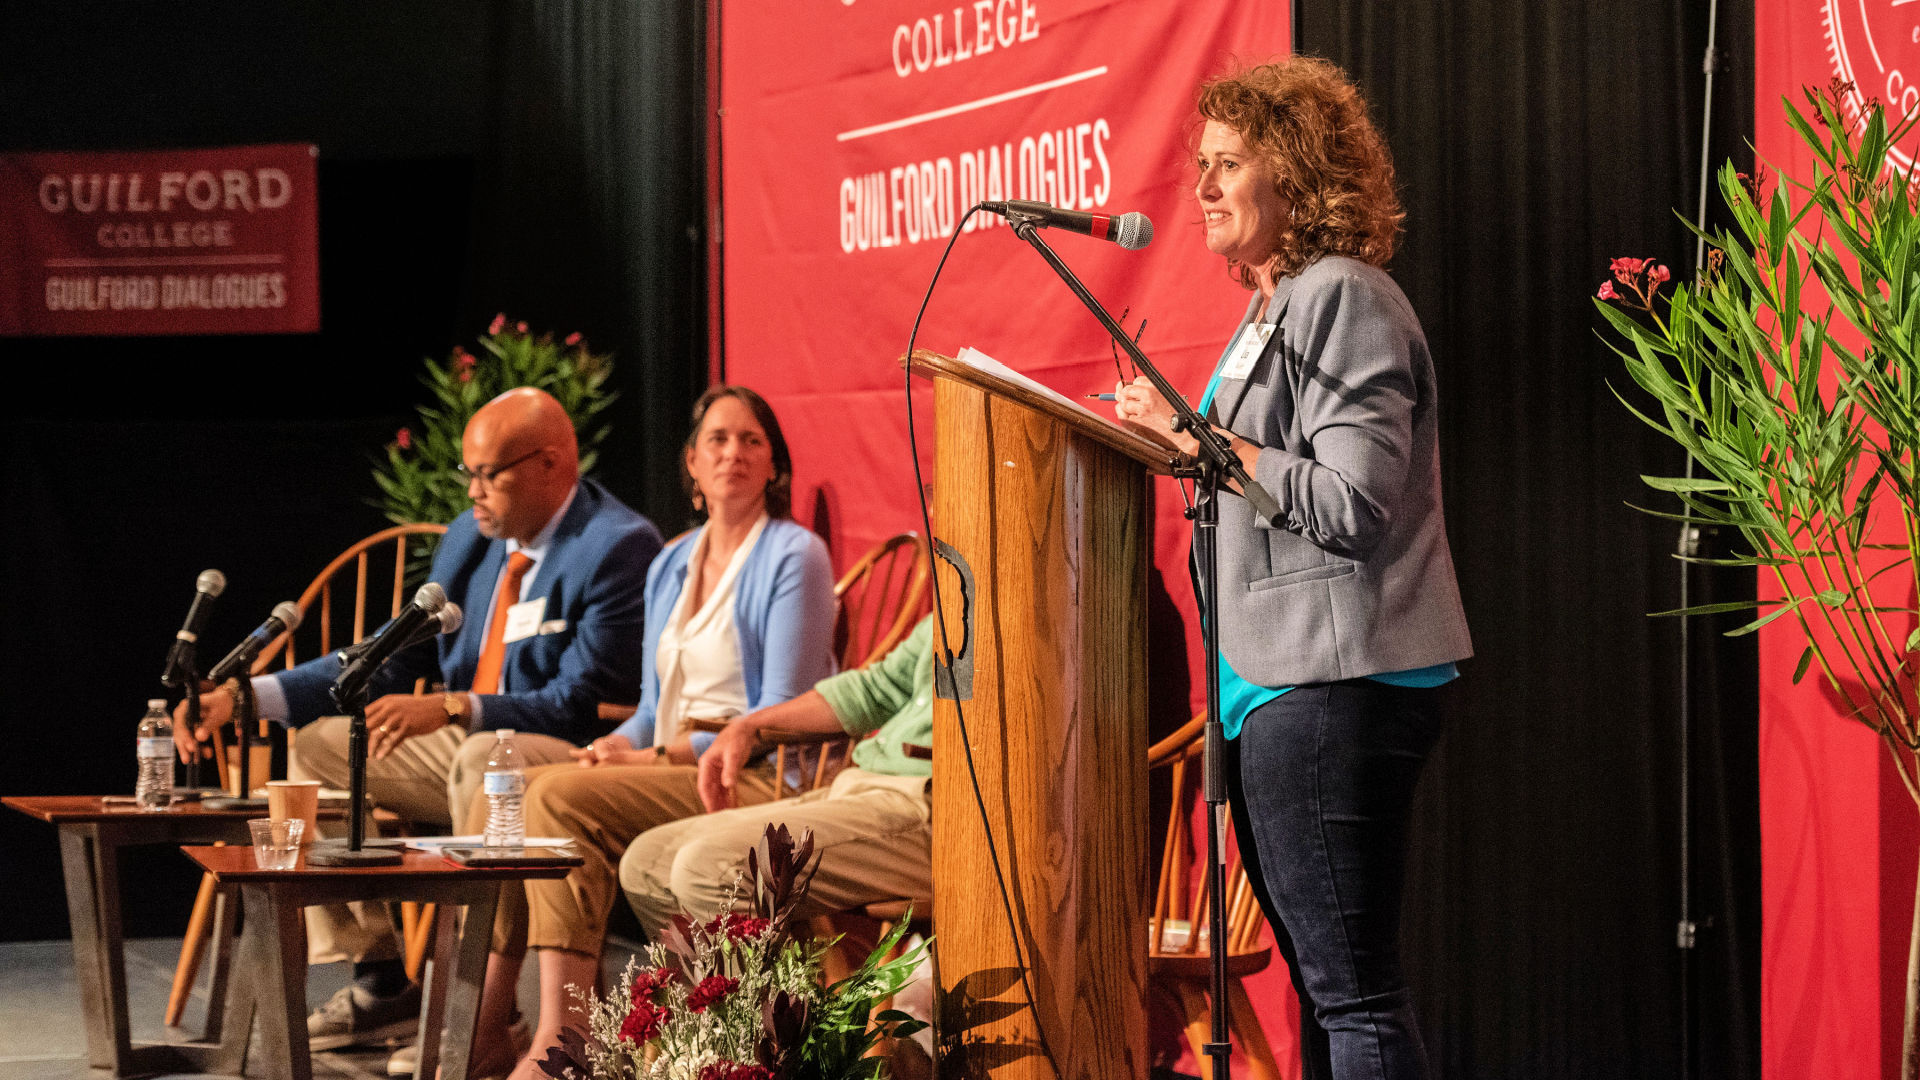 Lisa Hazlett stands at the podium on stage during the Guilford Dialogues.